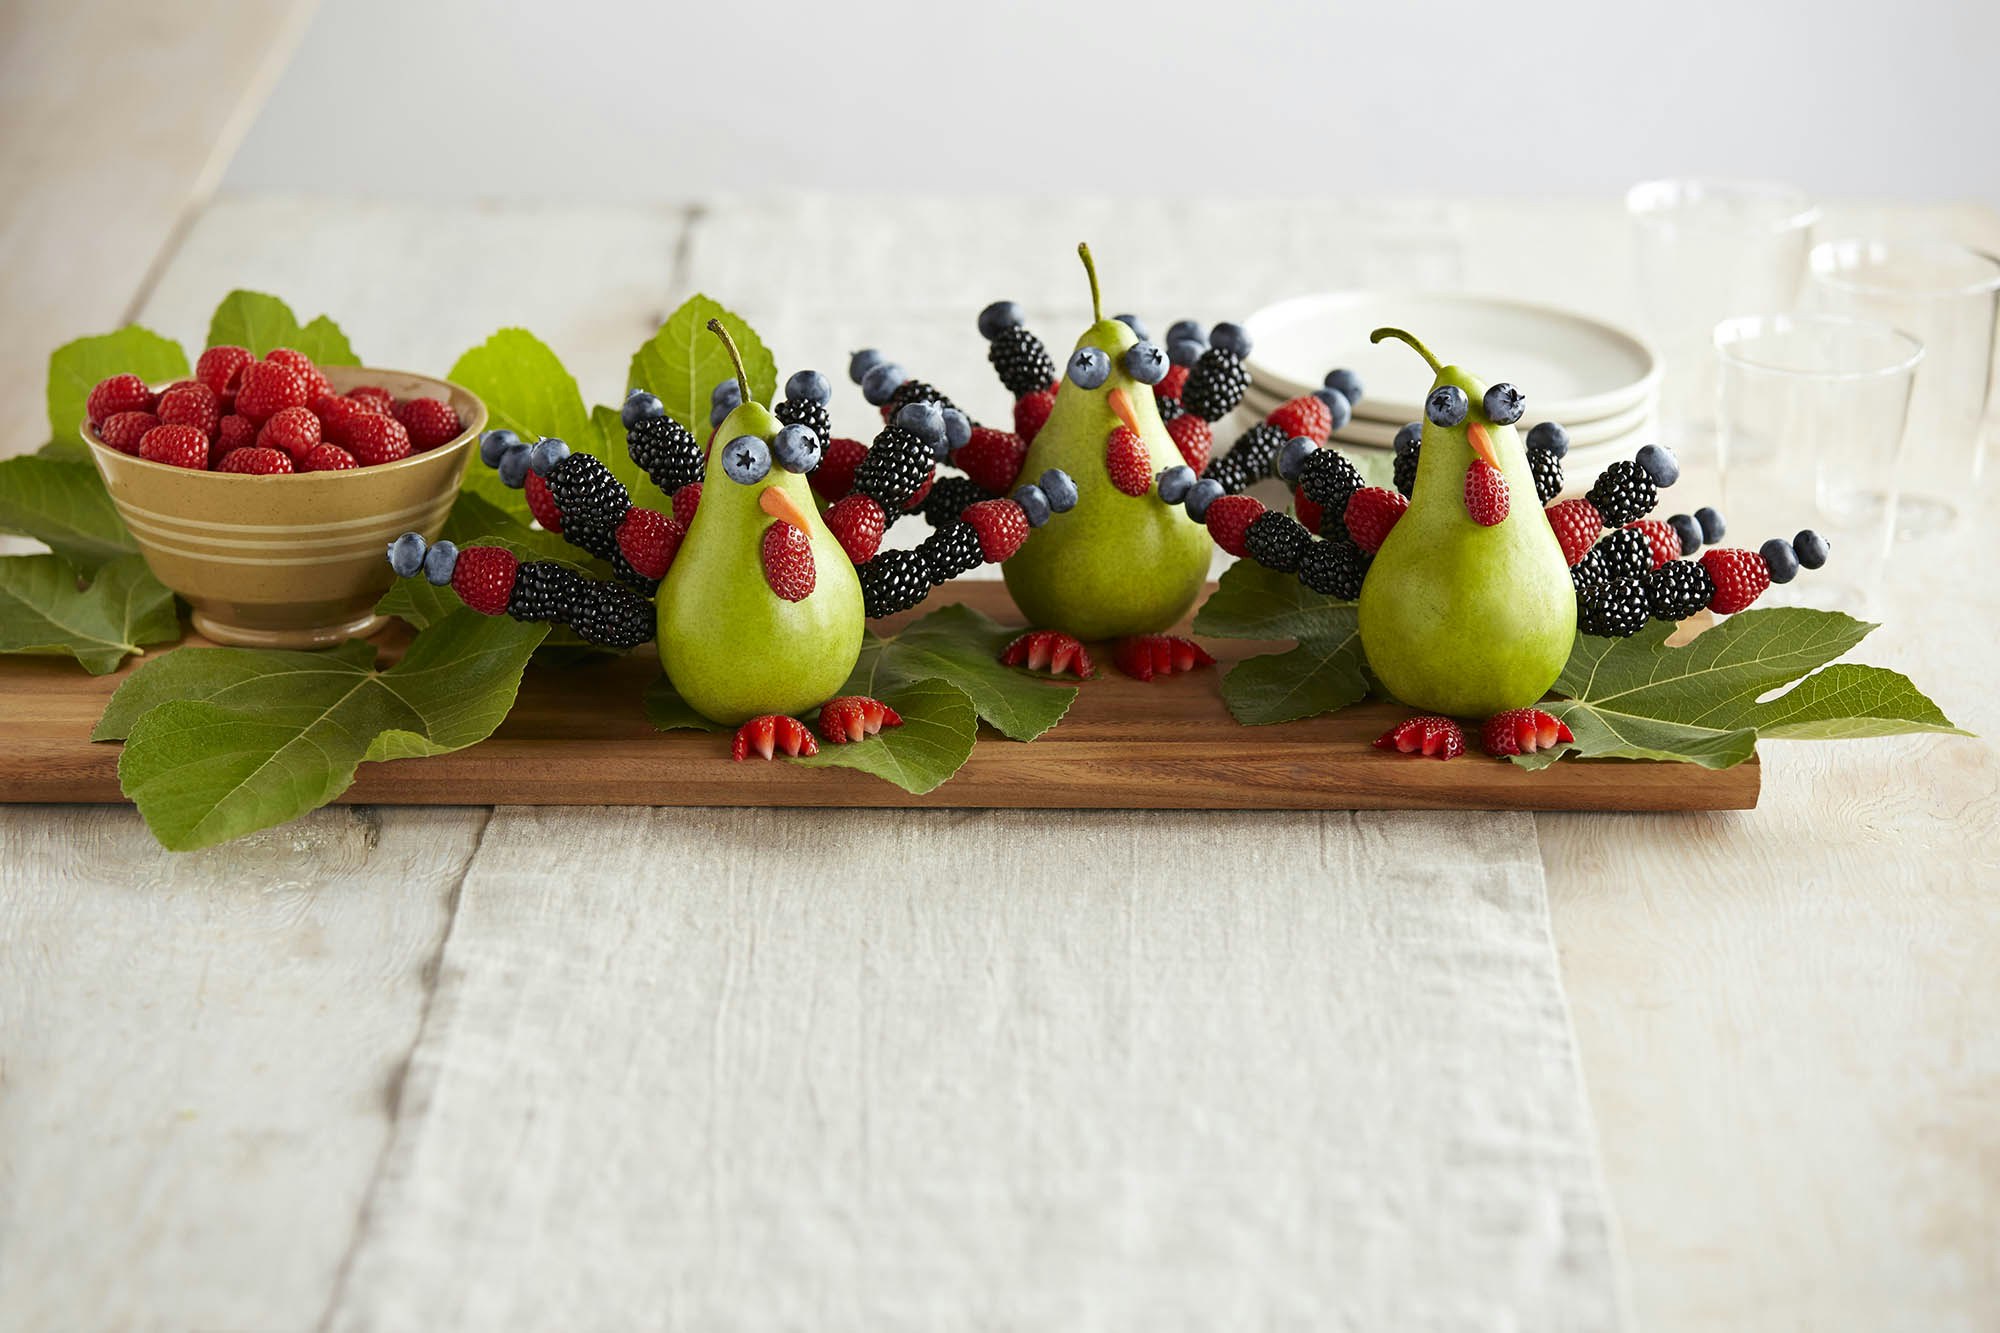 Turkeys made out of pears and berries